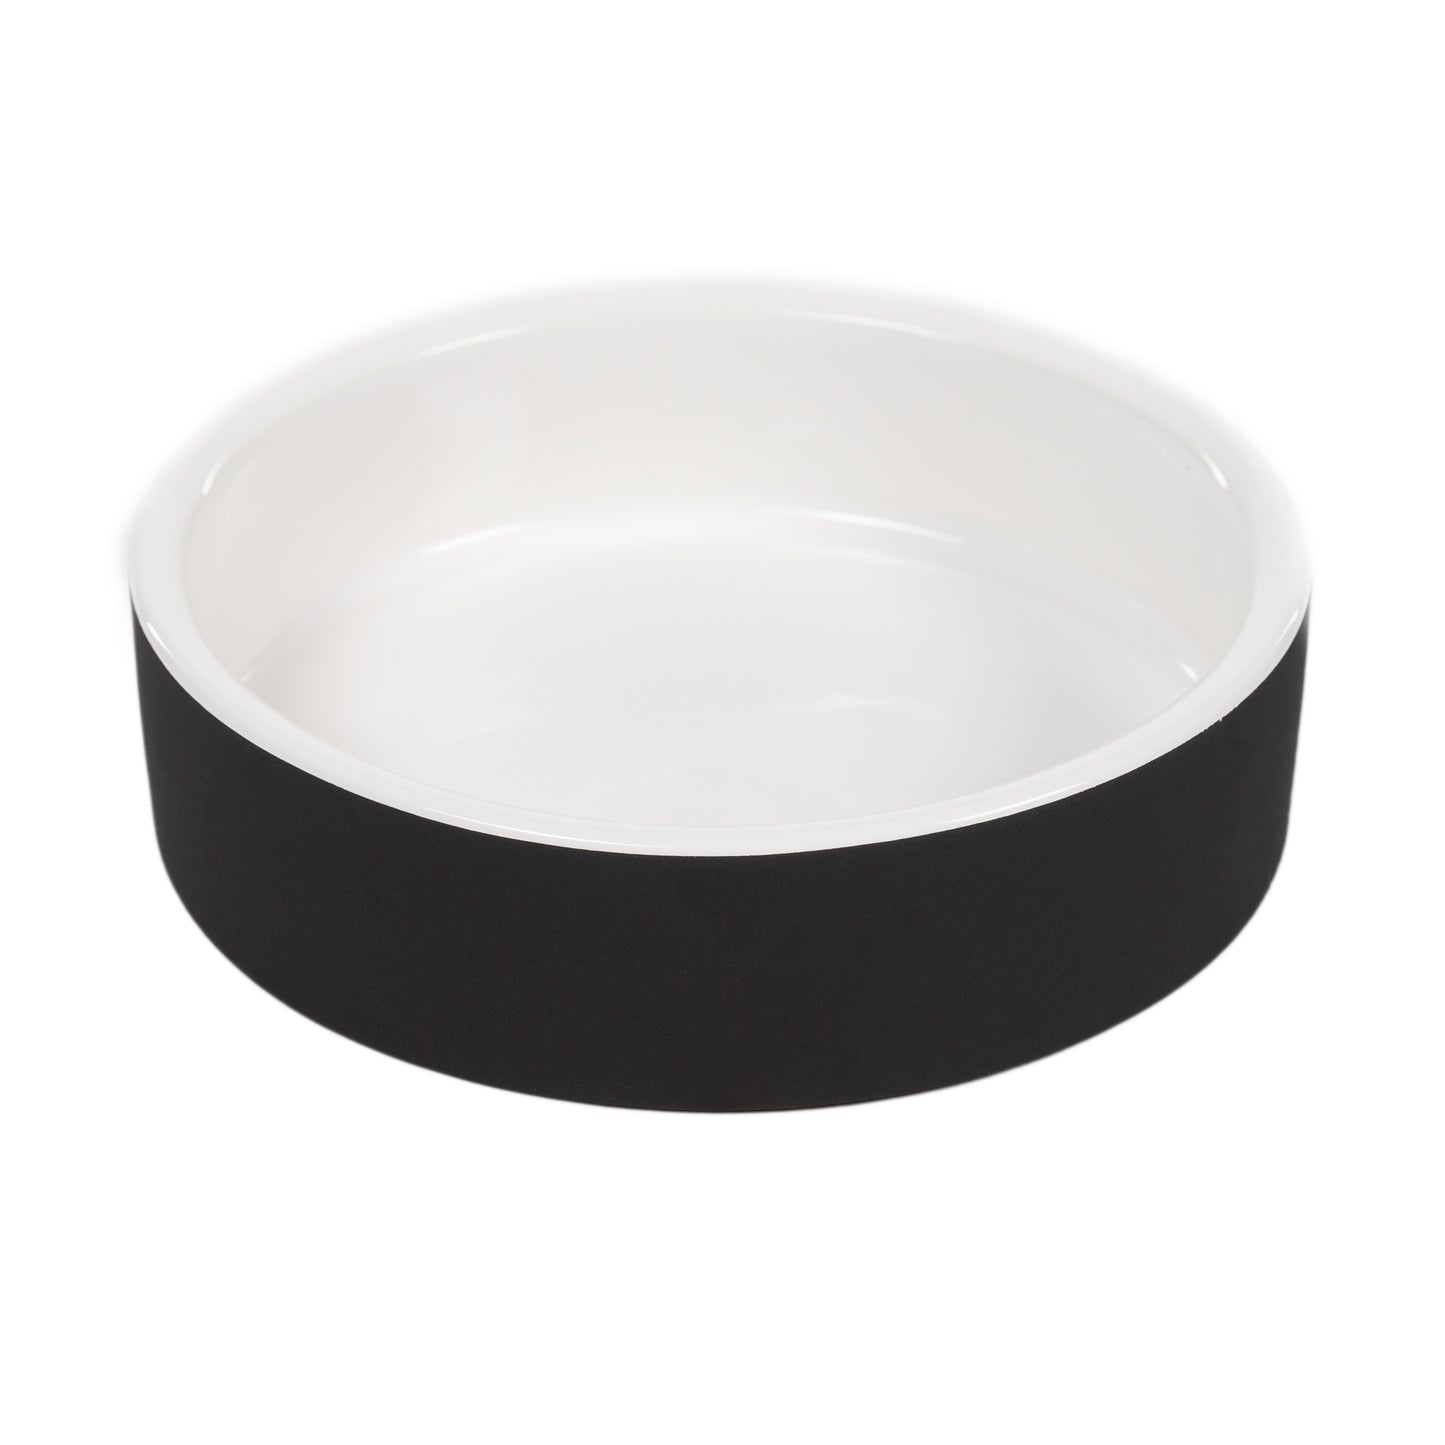 Cool Bowl Black XS for Pets